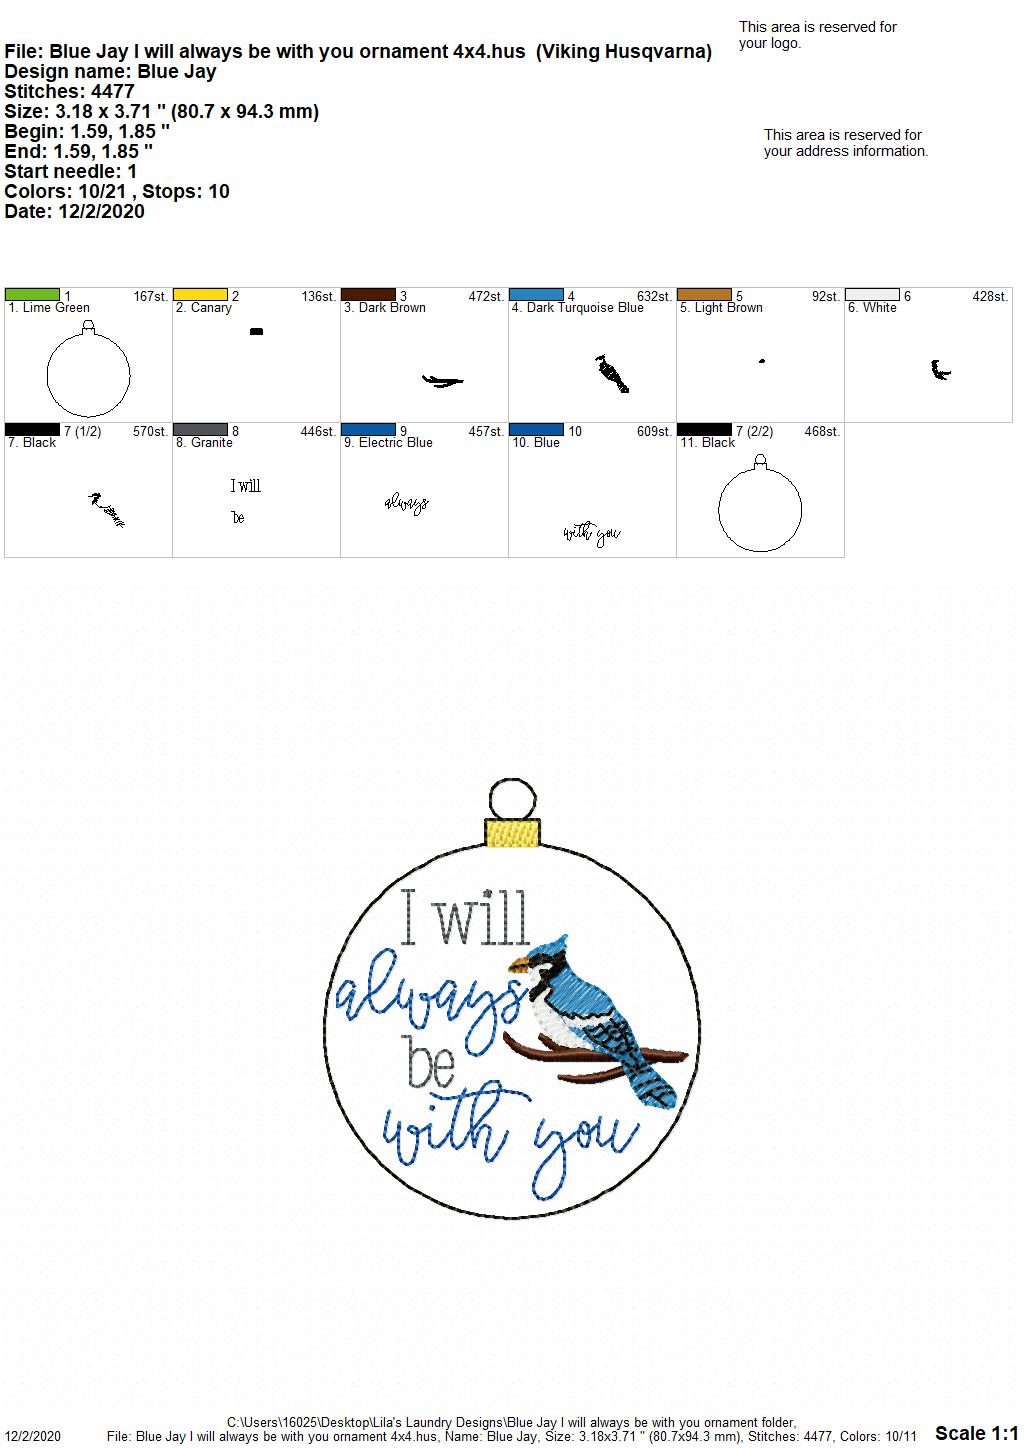 Blue Jay I will always be with you Ornament - Digital Embroidery Design